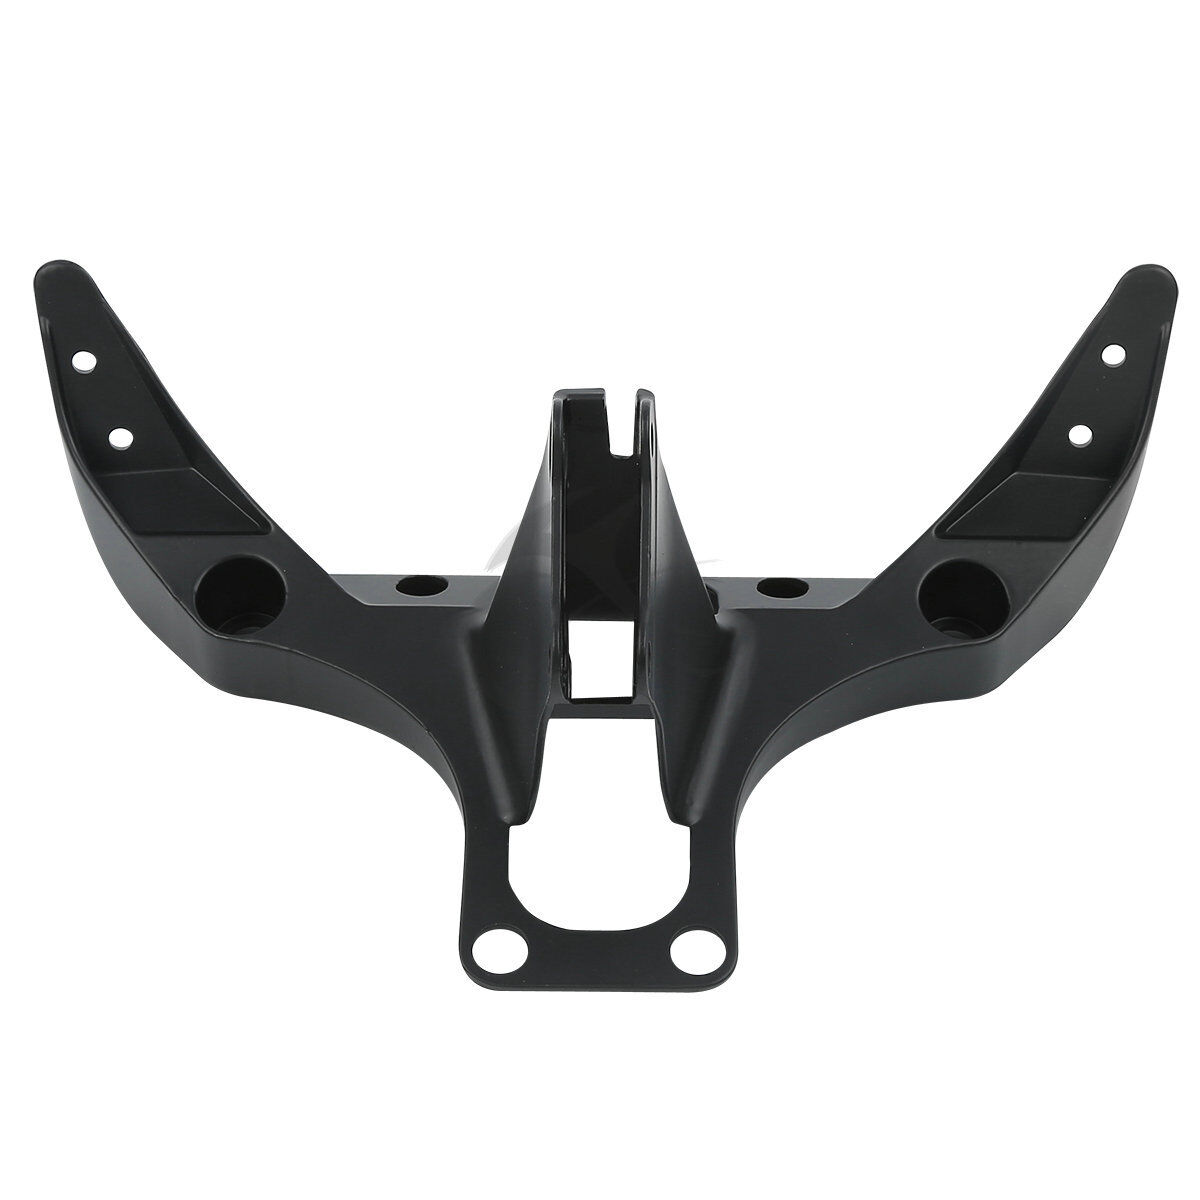 Details about   New Upper Stay Fairing Cowl Headlight Bracket For Yamaha YZFR1 YZF-R1 2002-2003 